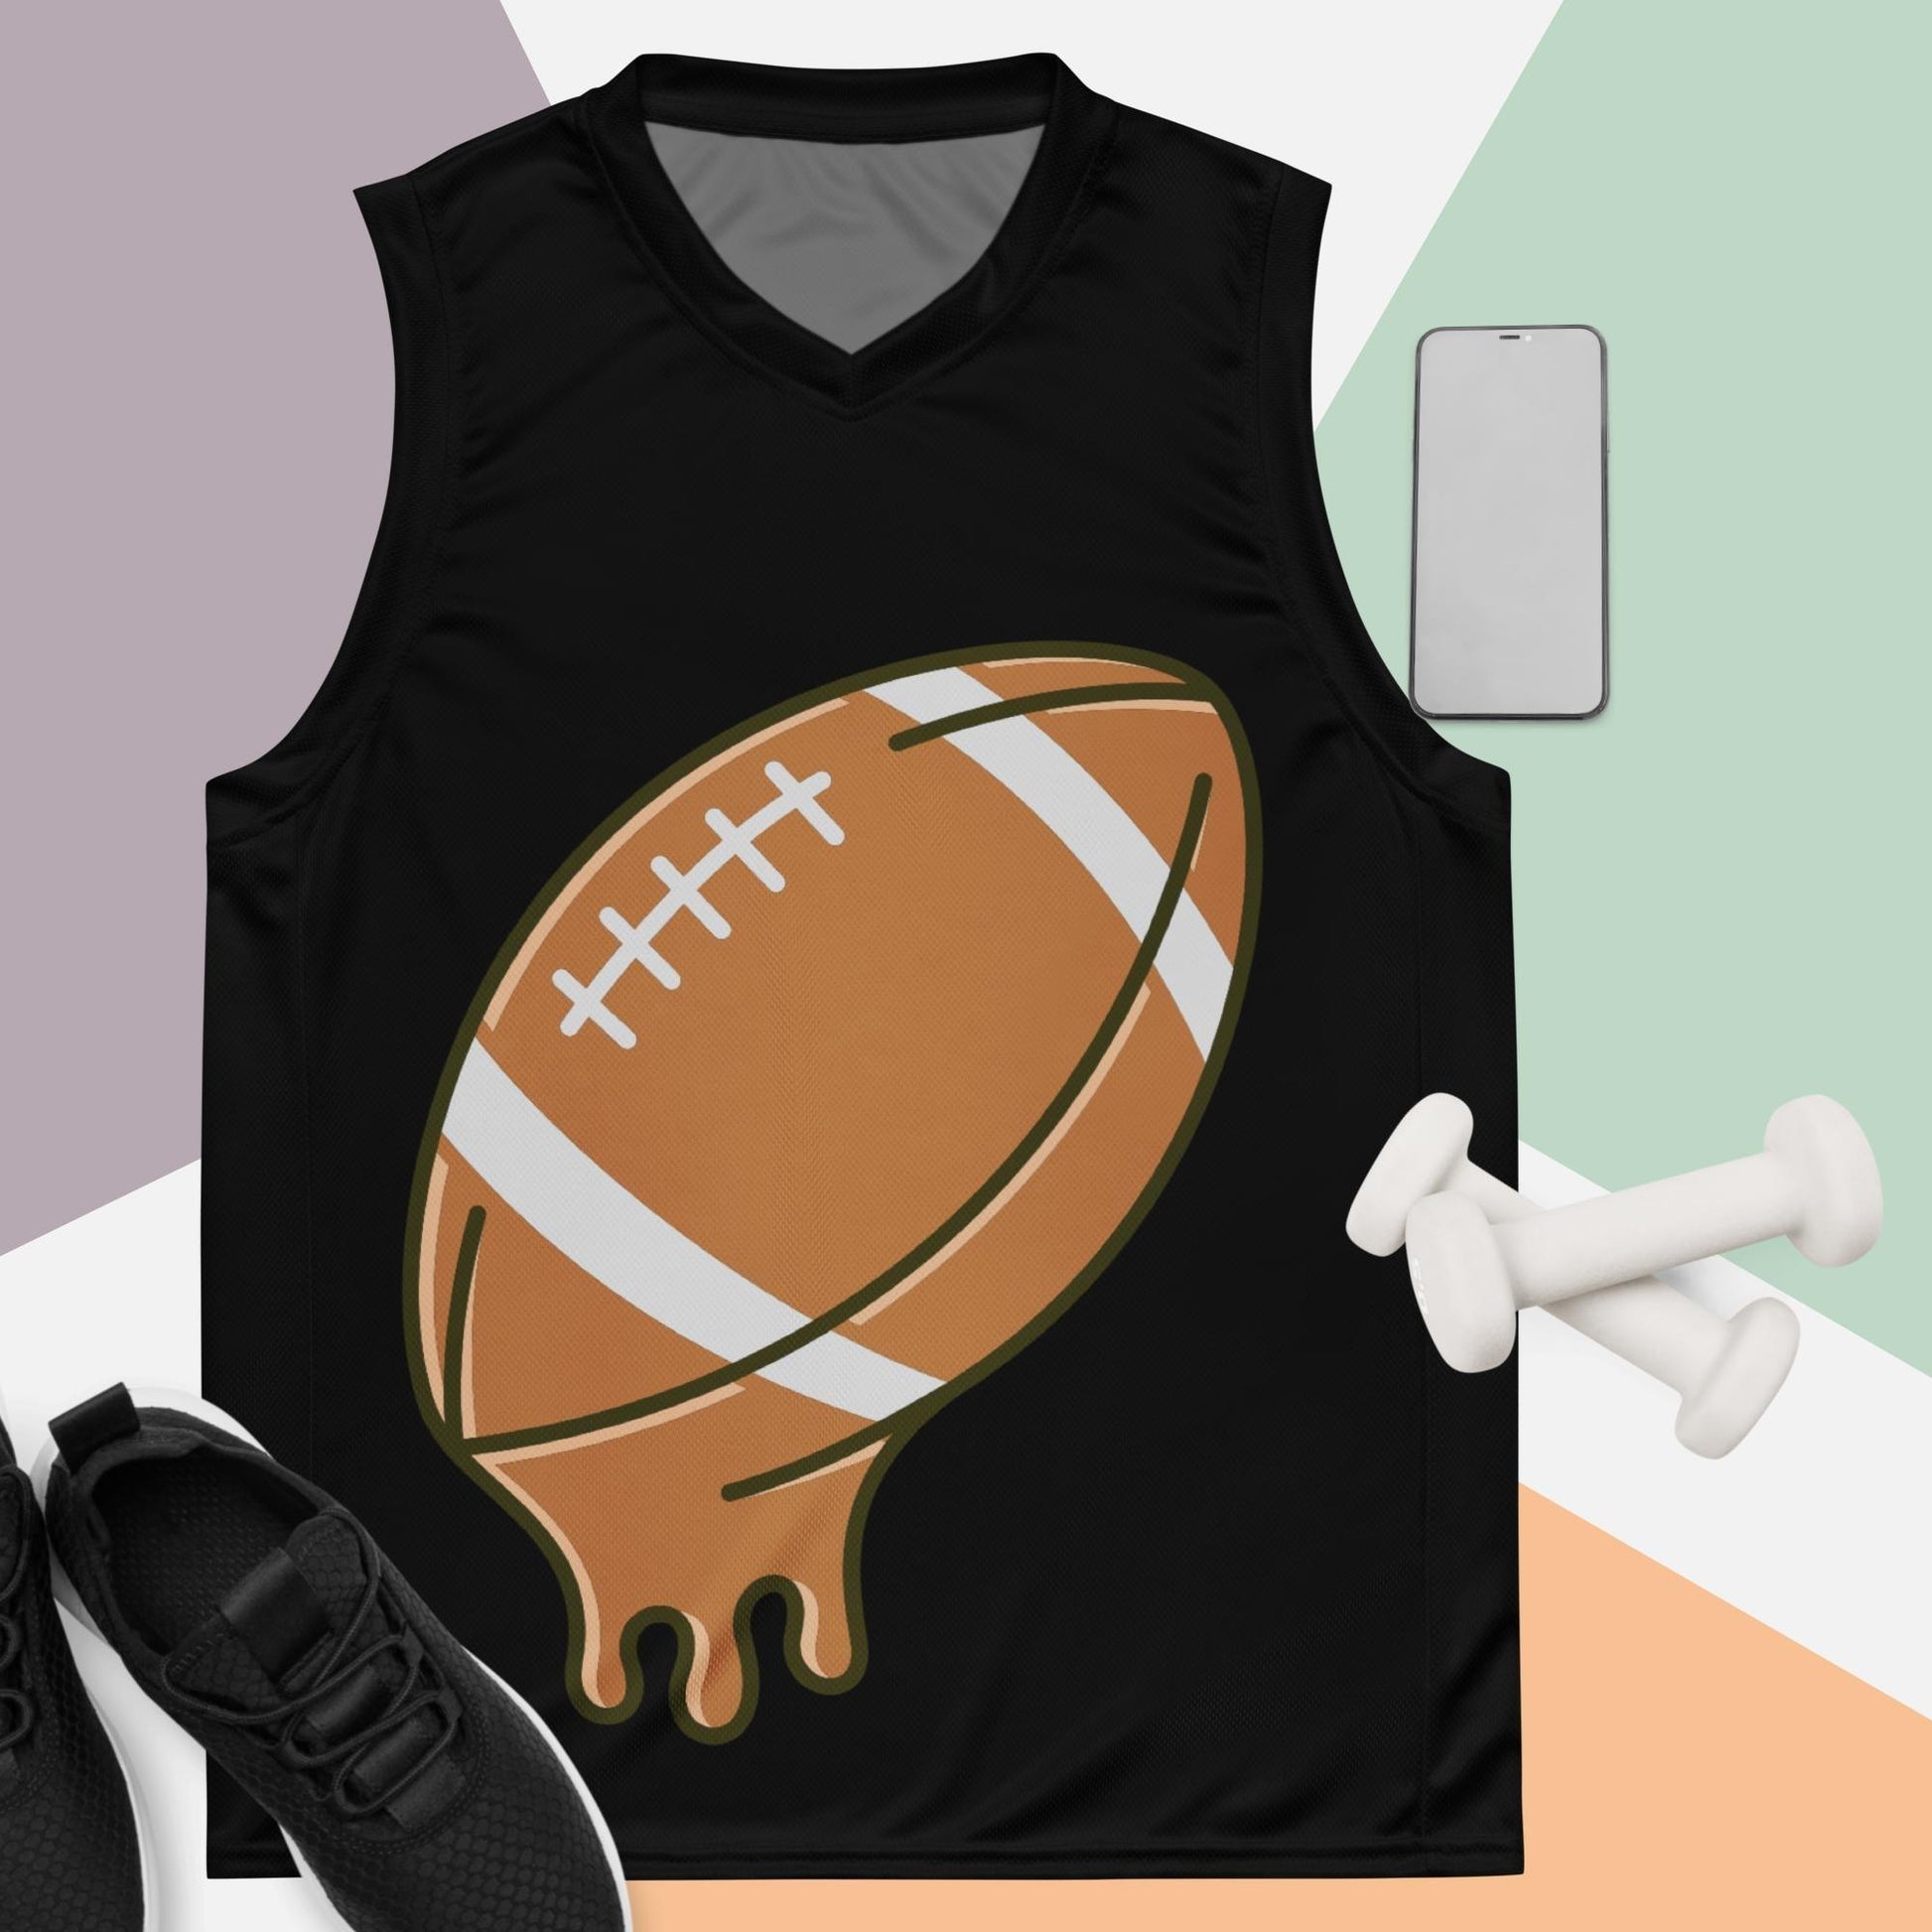 The Melting Football Recycled Unisex Basketball Jersey - Redefine Style and Sustainability! - Lizard Vigilante